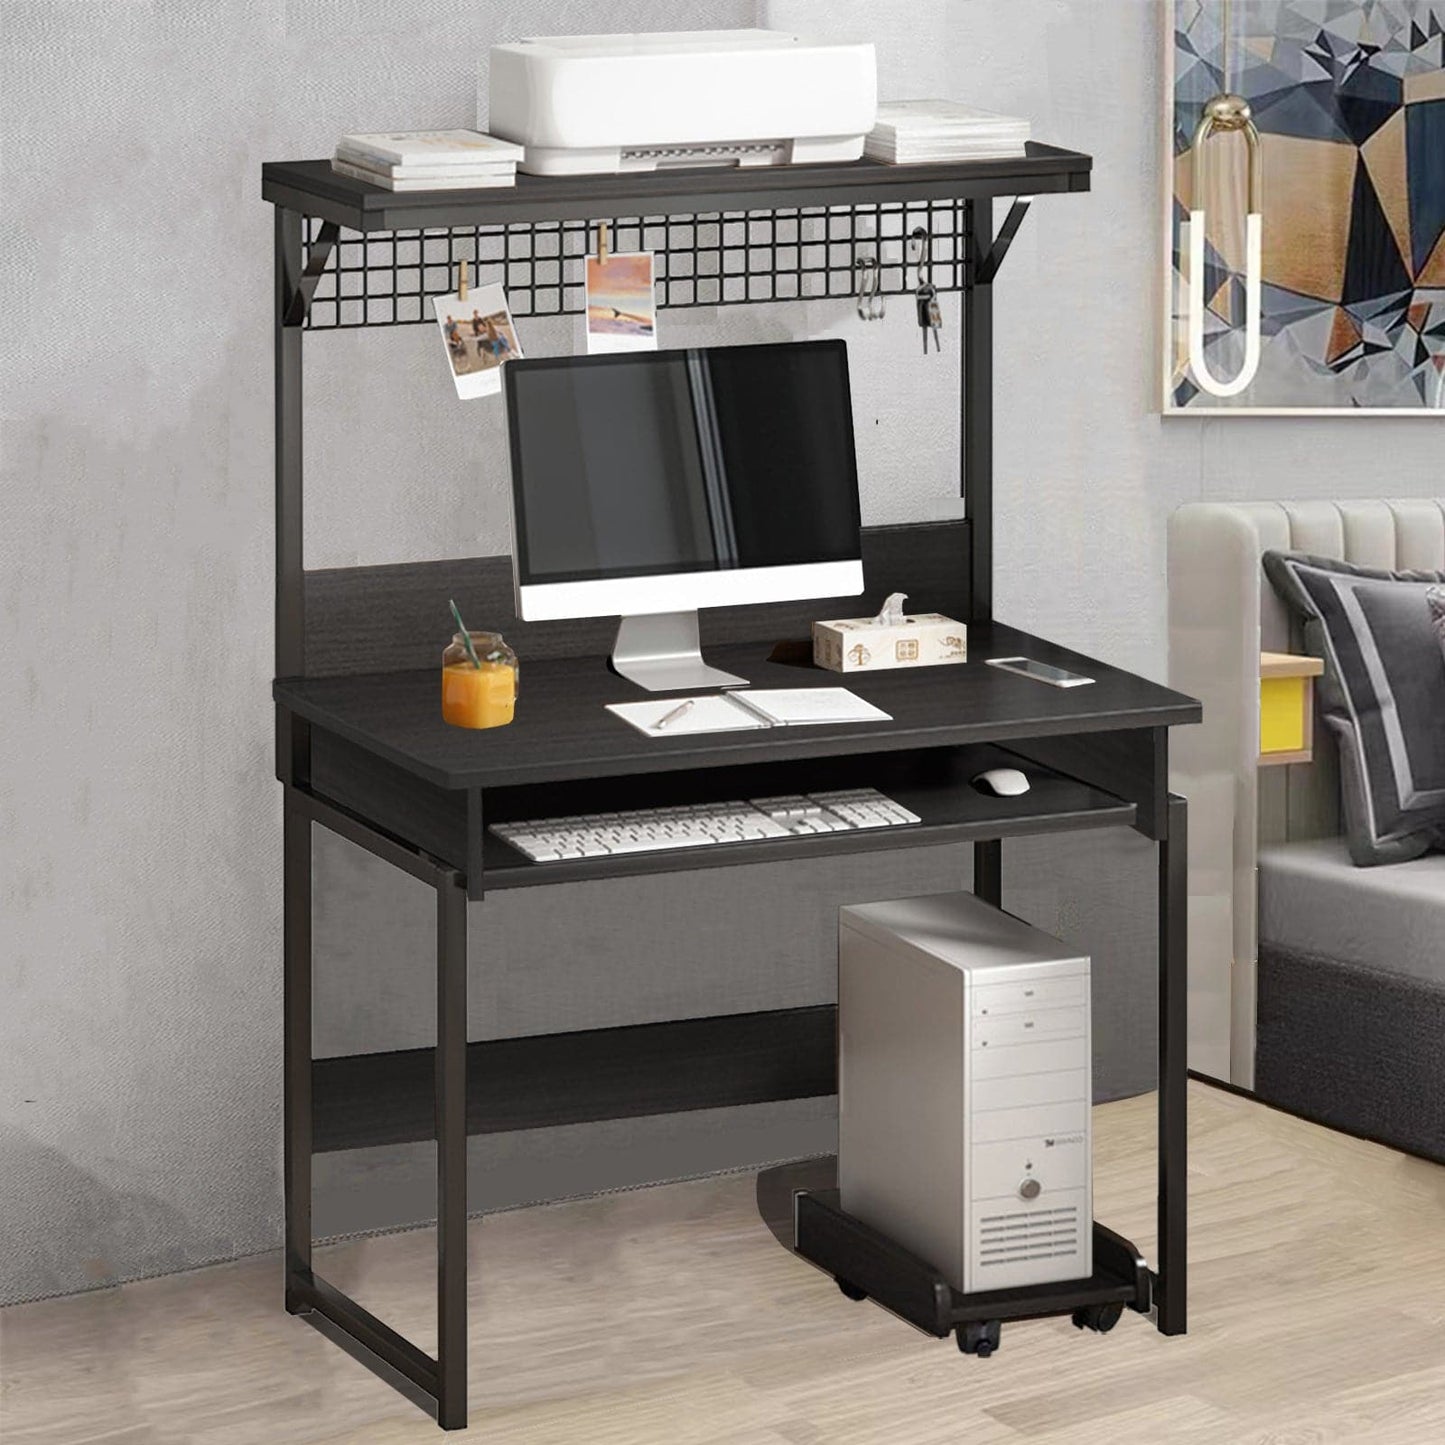 Computer Desk with Hutch,Inch Modern Writing Desk with Storage Shelves, Office Desk Study Table Gaming Desk Workstation